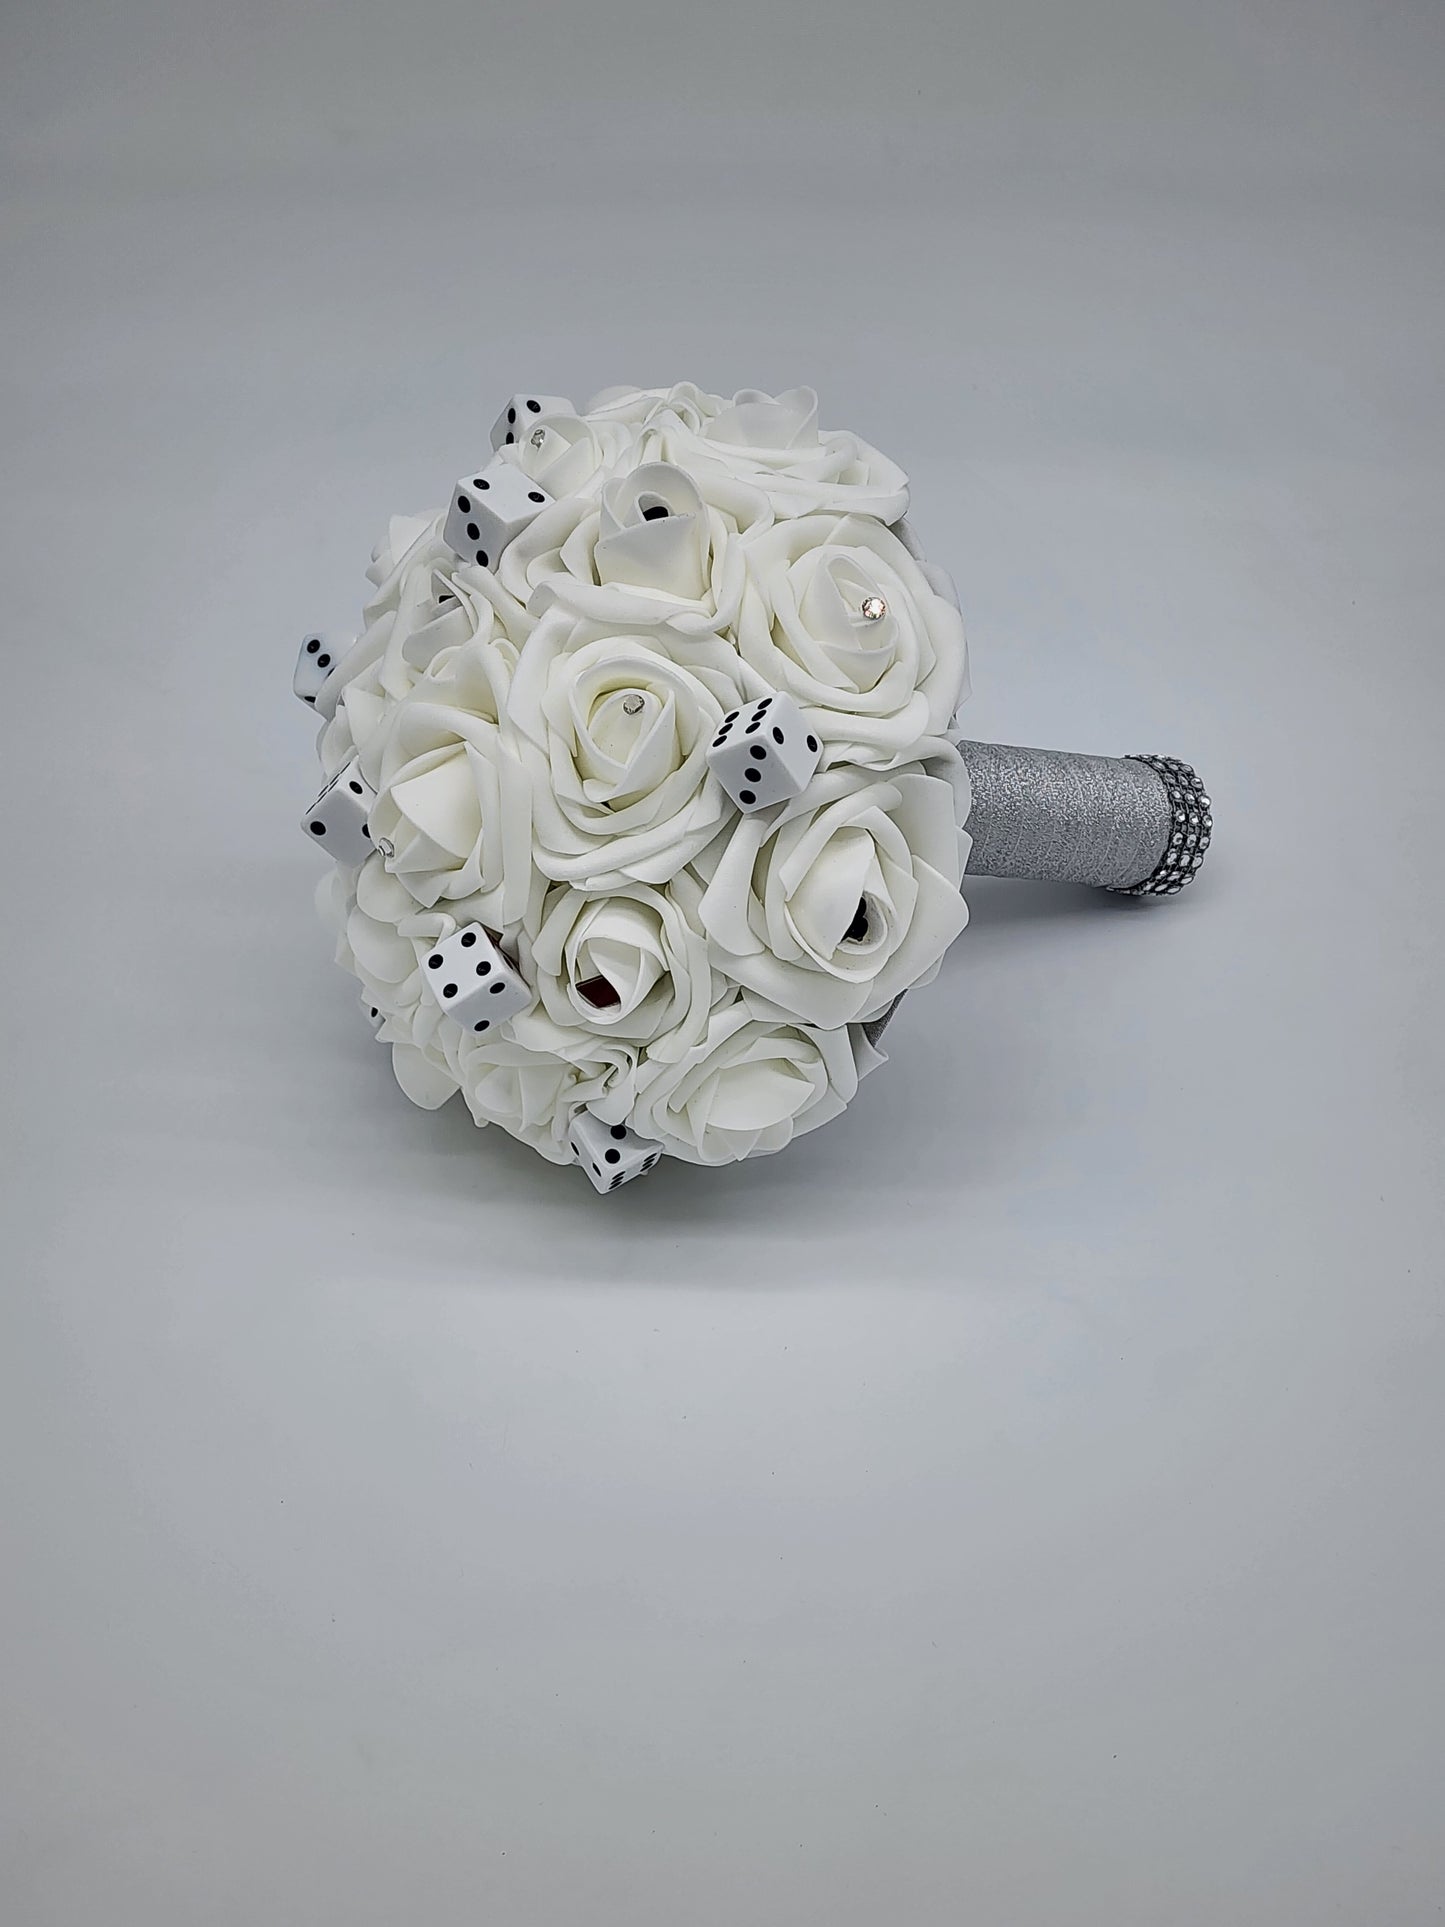 Las Vegas White and Silver Themed Bridal Bouquet